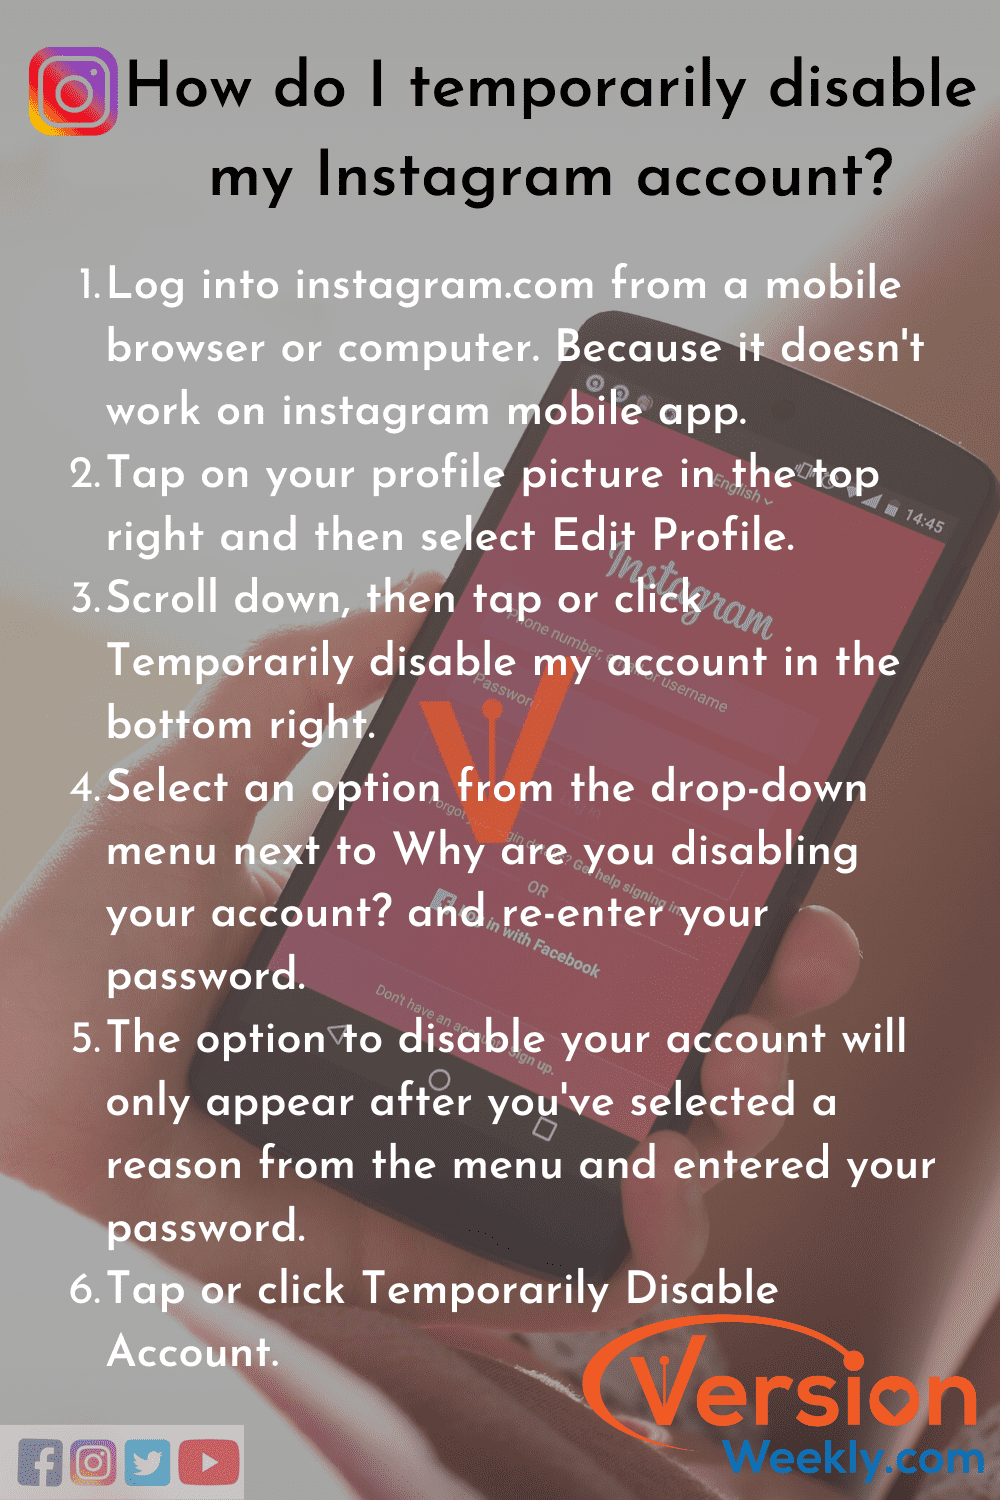 How to disable instagram account temporarily